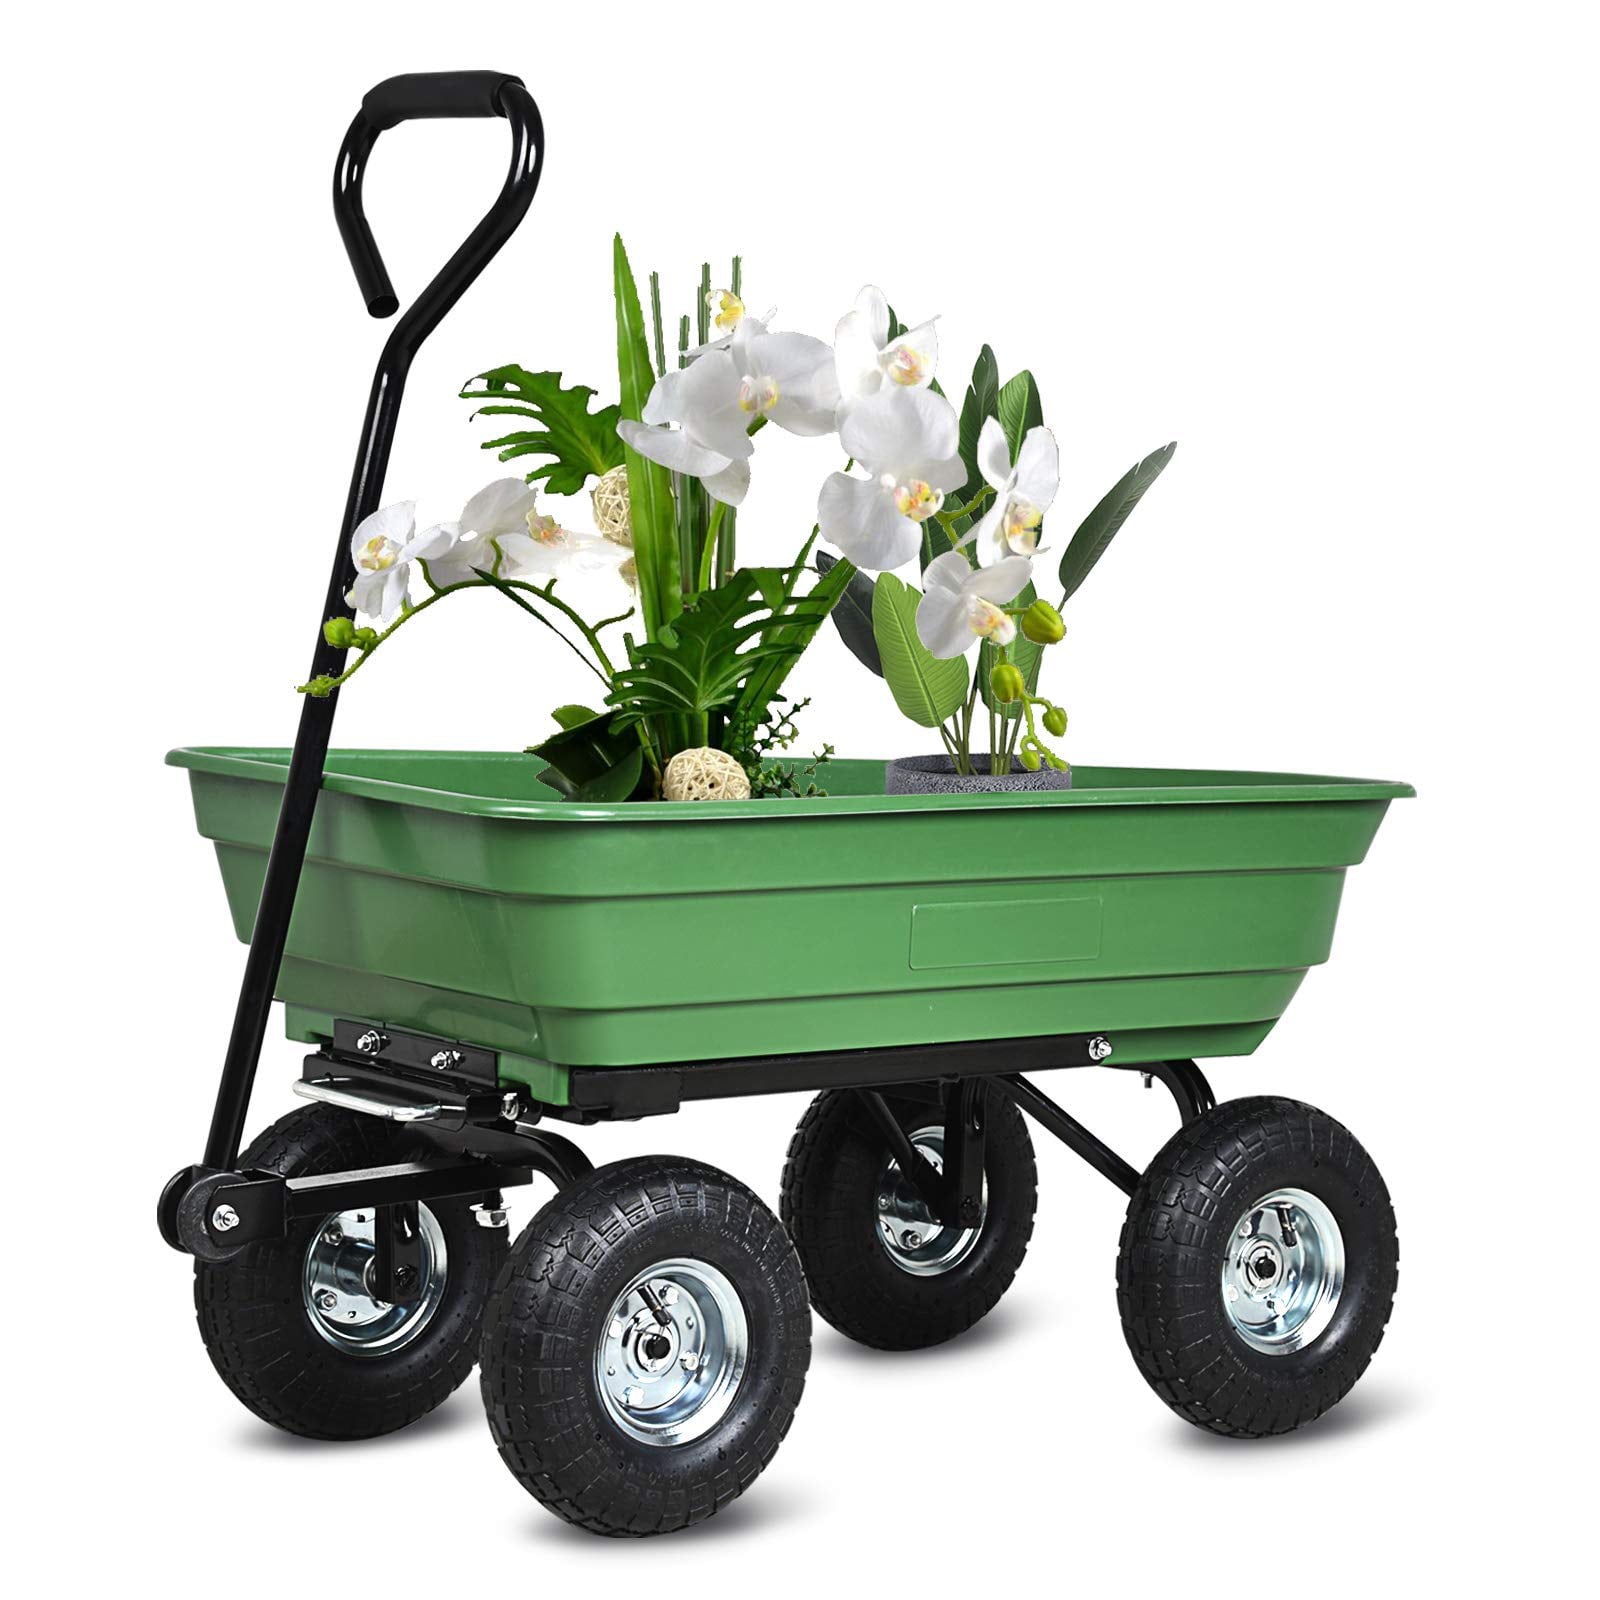 Bestof You: Great Step 2 Green Garden Cart Of All Time Don'T Miss Out!